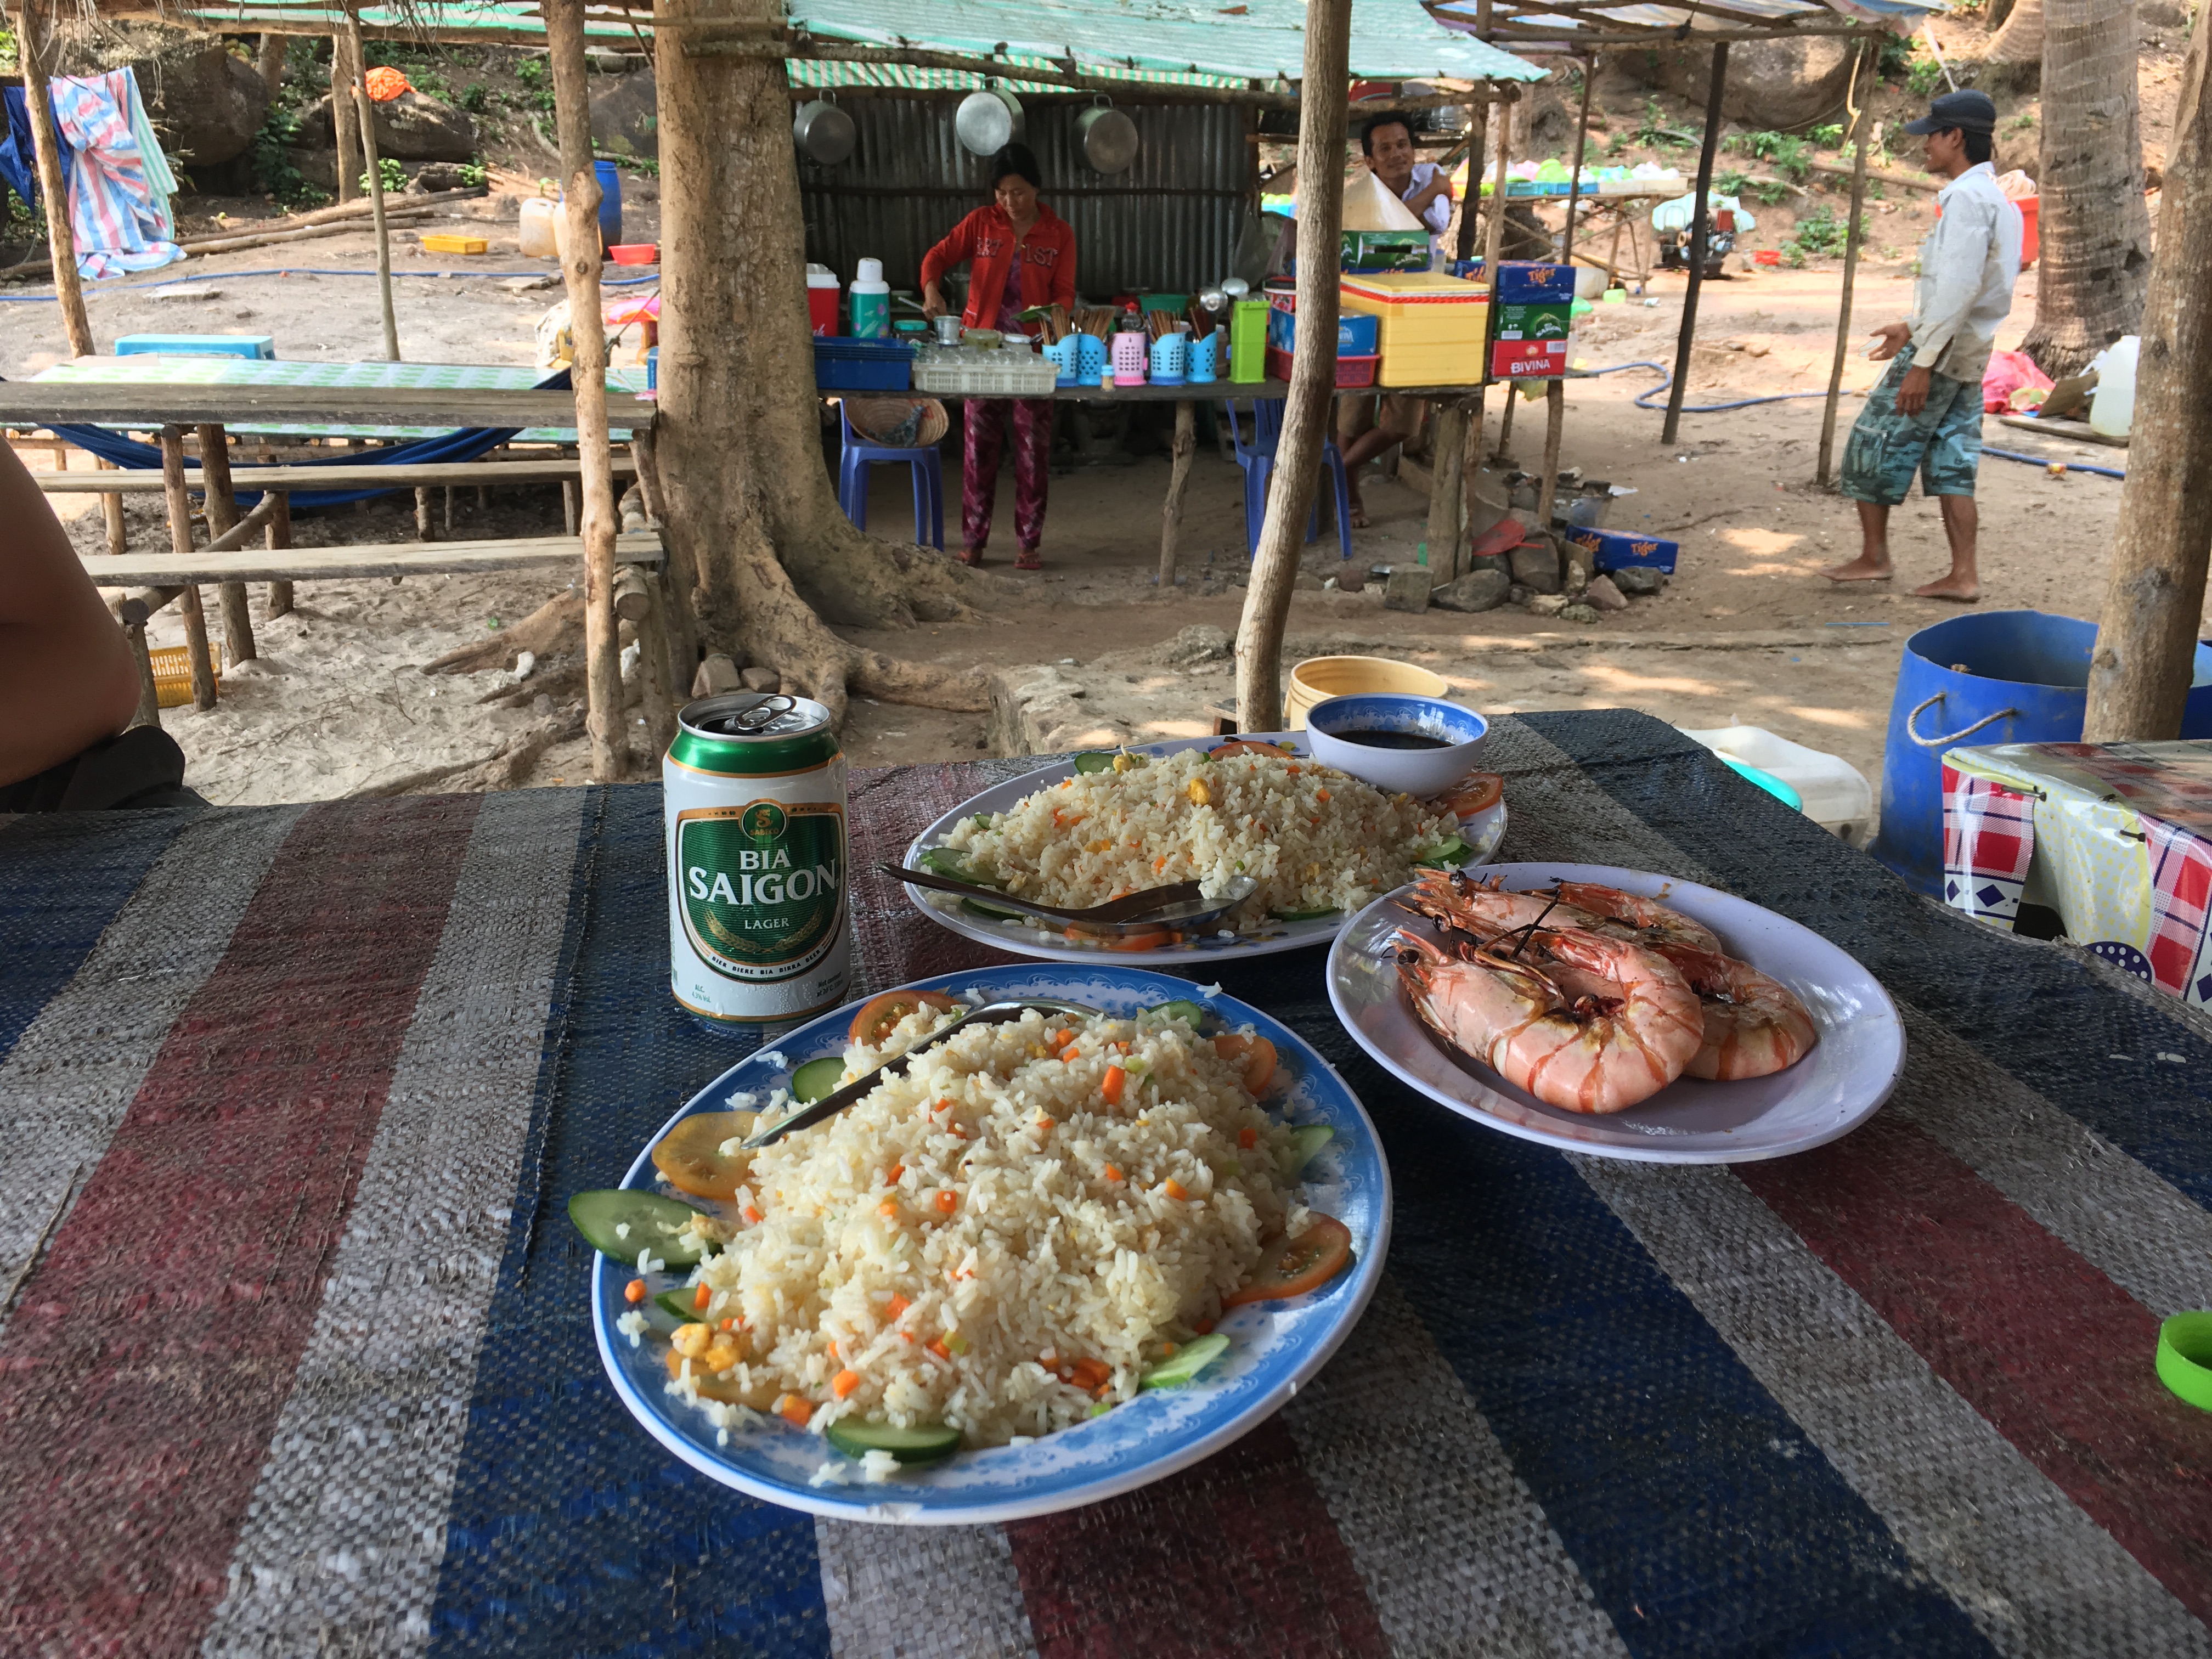 Lunch at one of the An Thoi islands of Phu Quoc, Vietnam.